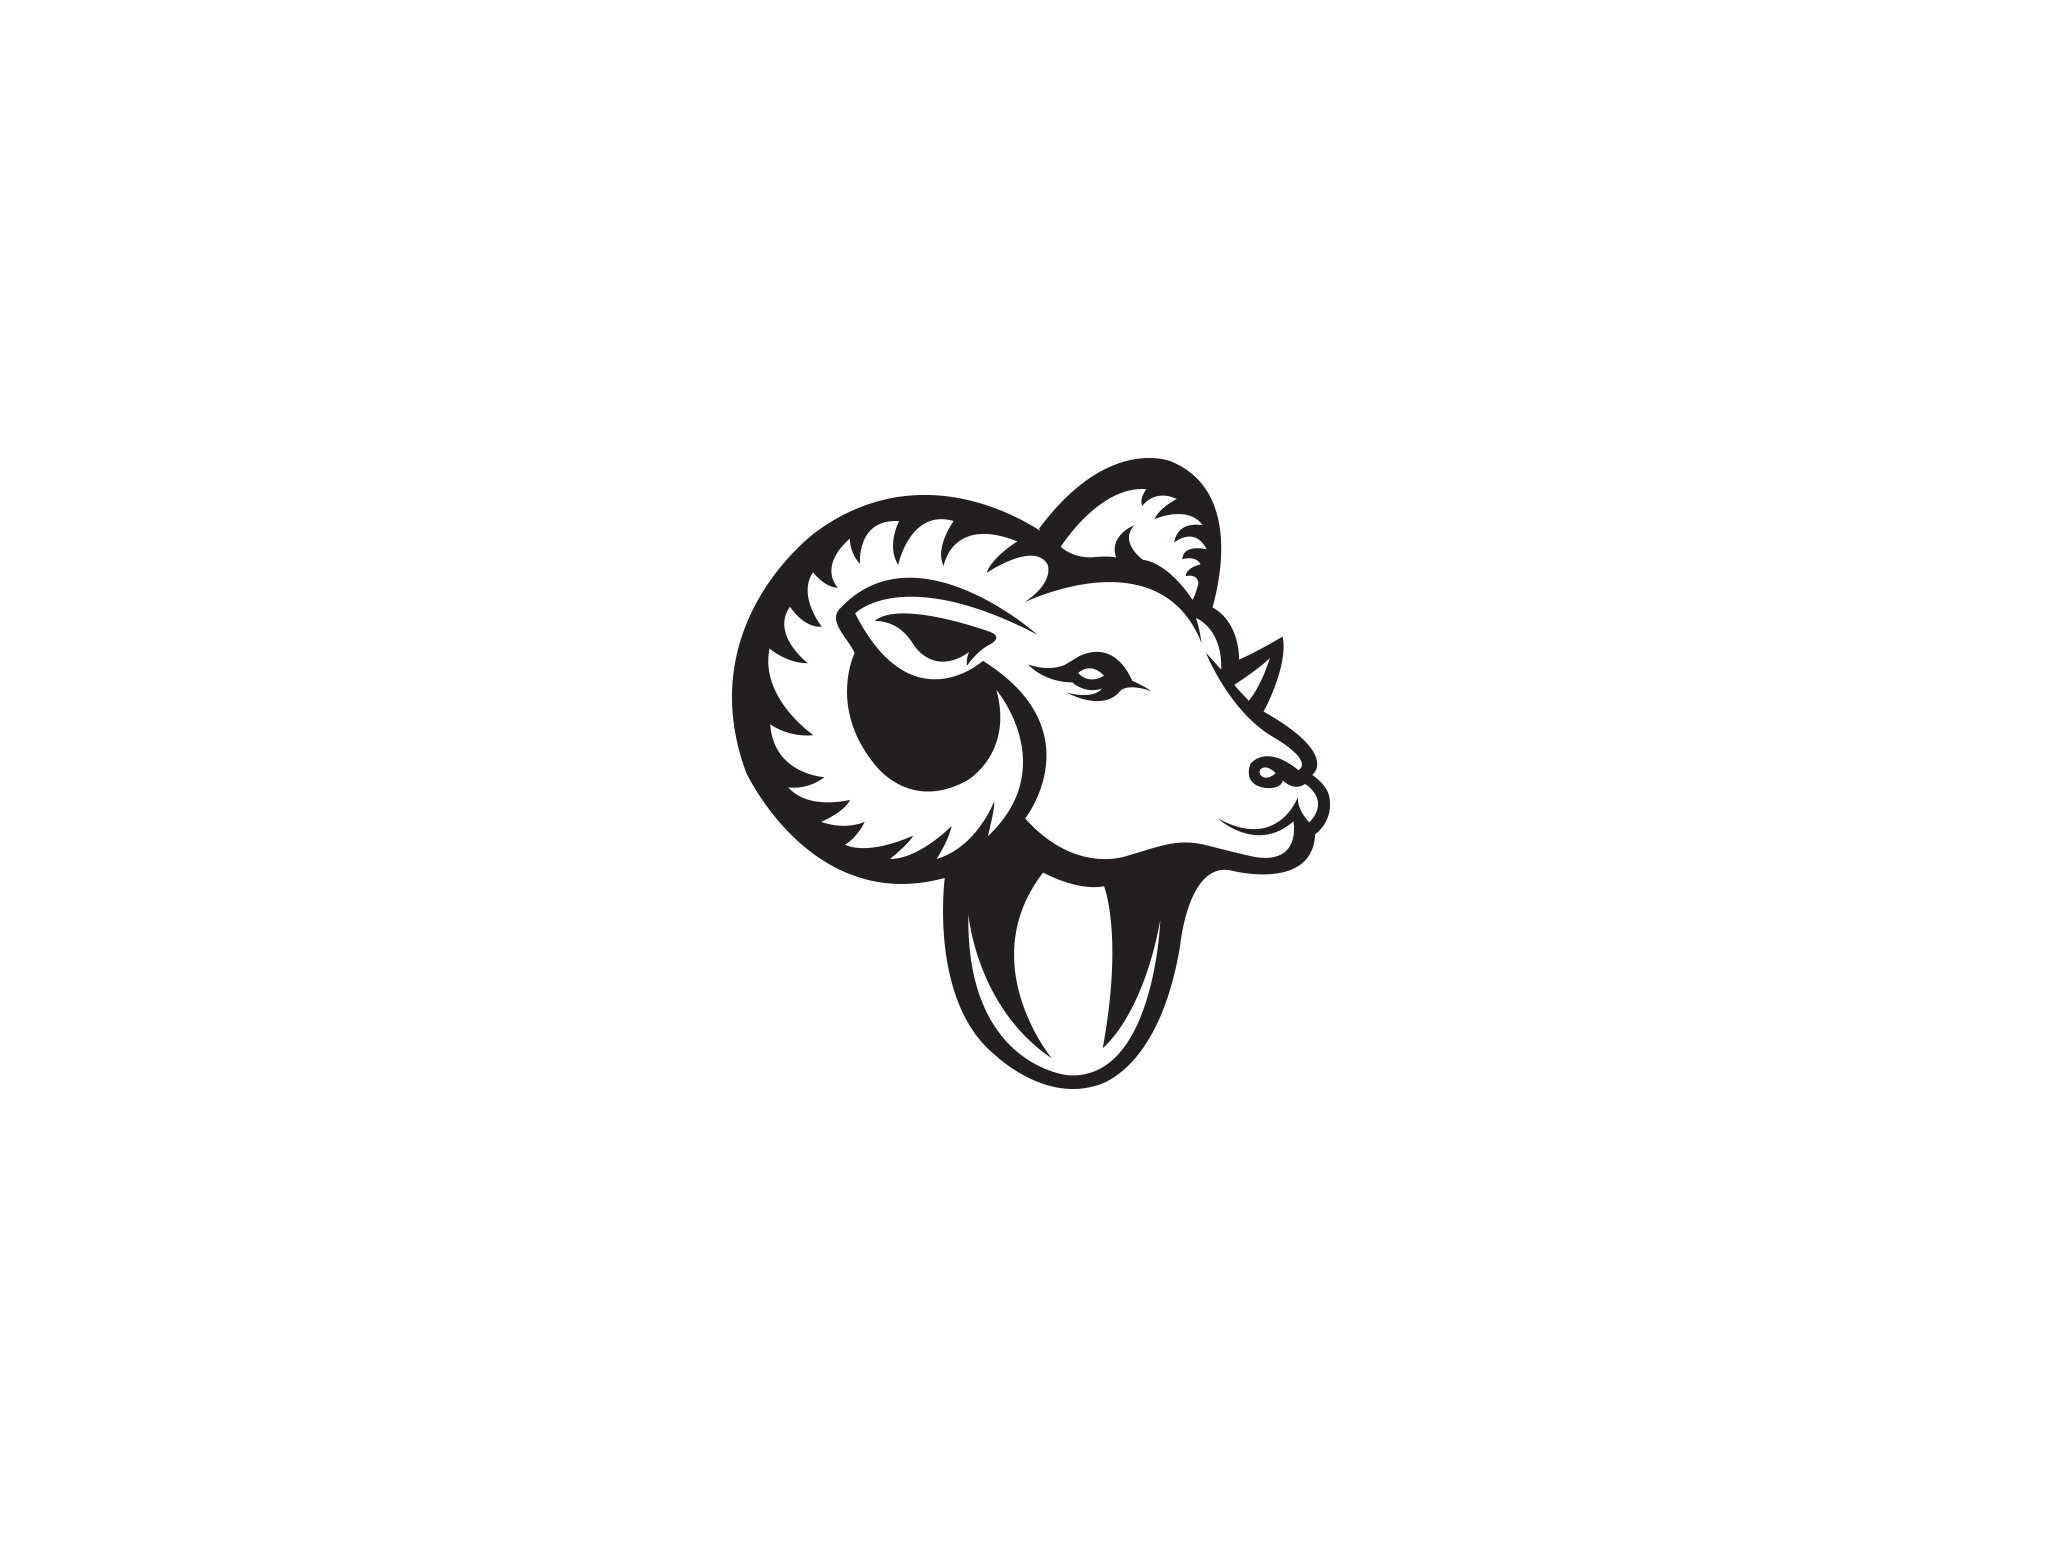 ram head clipart black and white